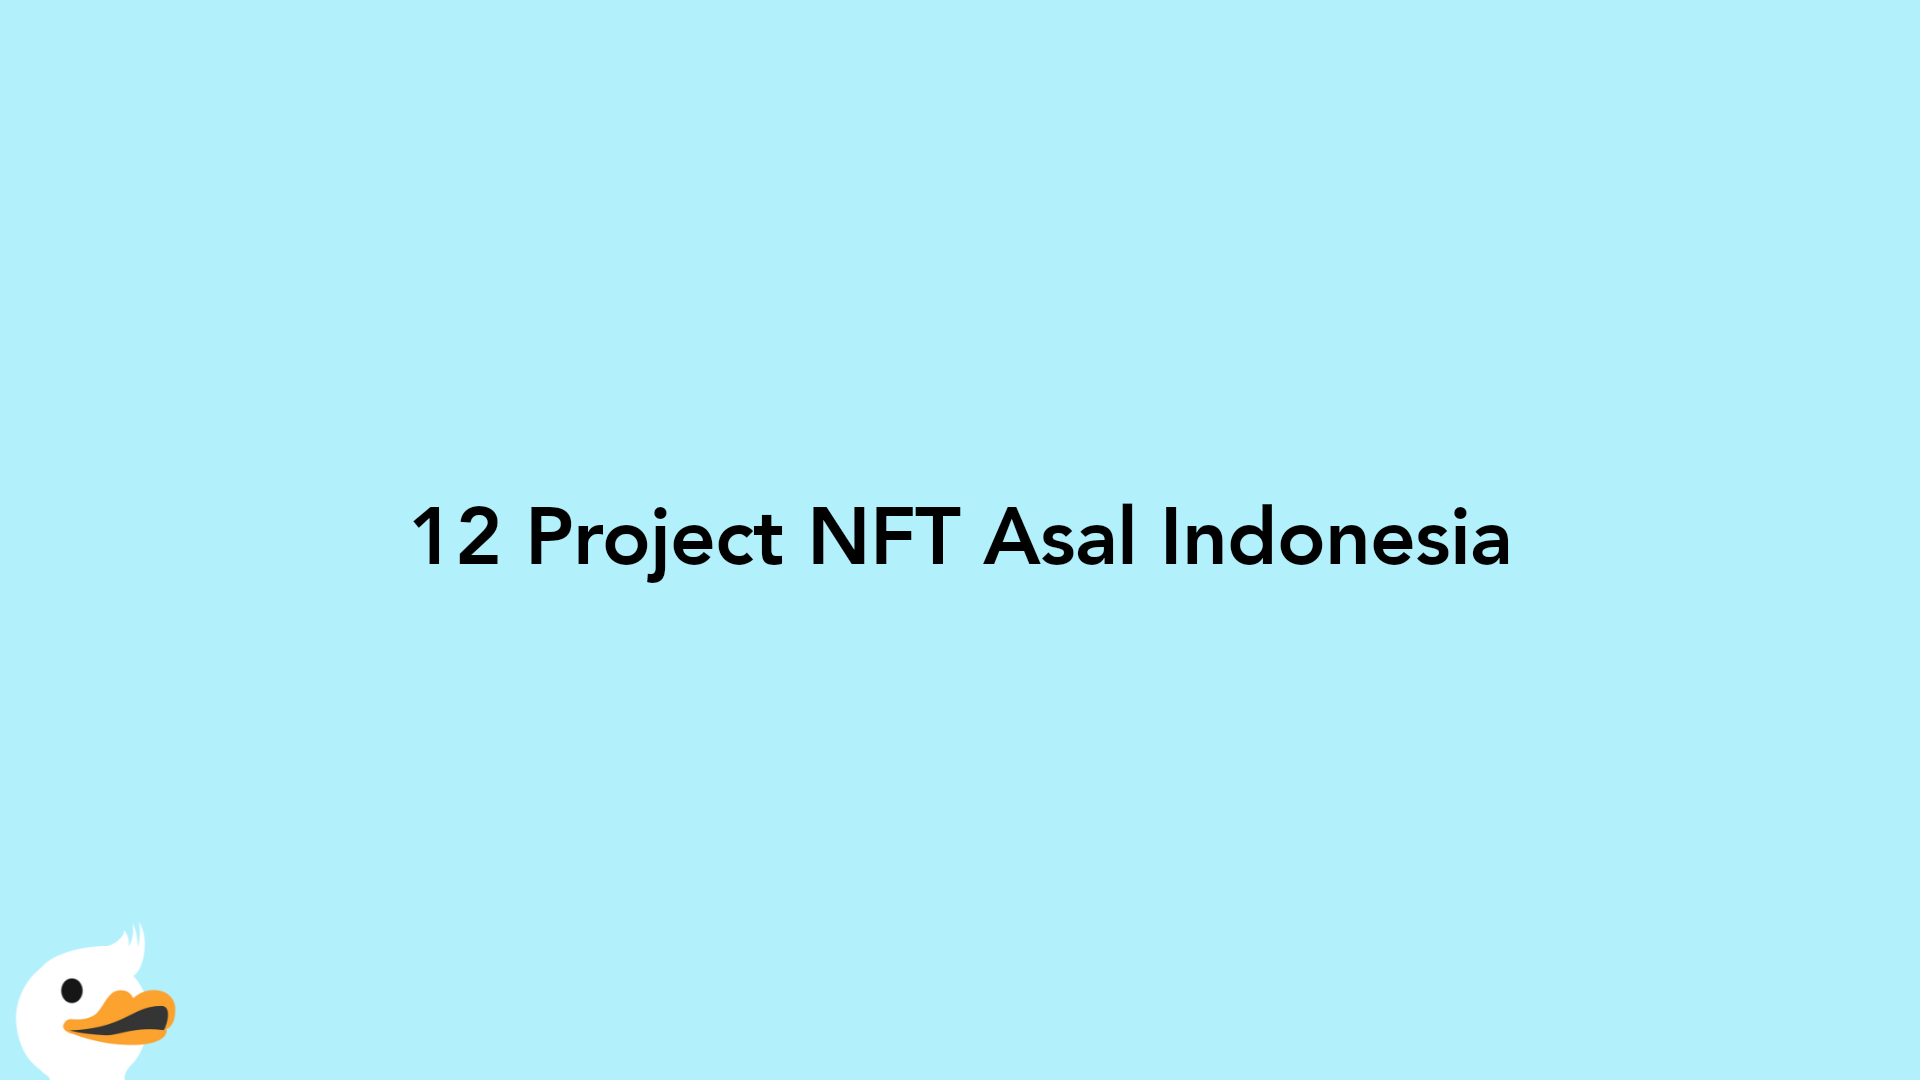 12 Project NFT Asal Indonesia